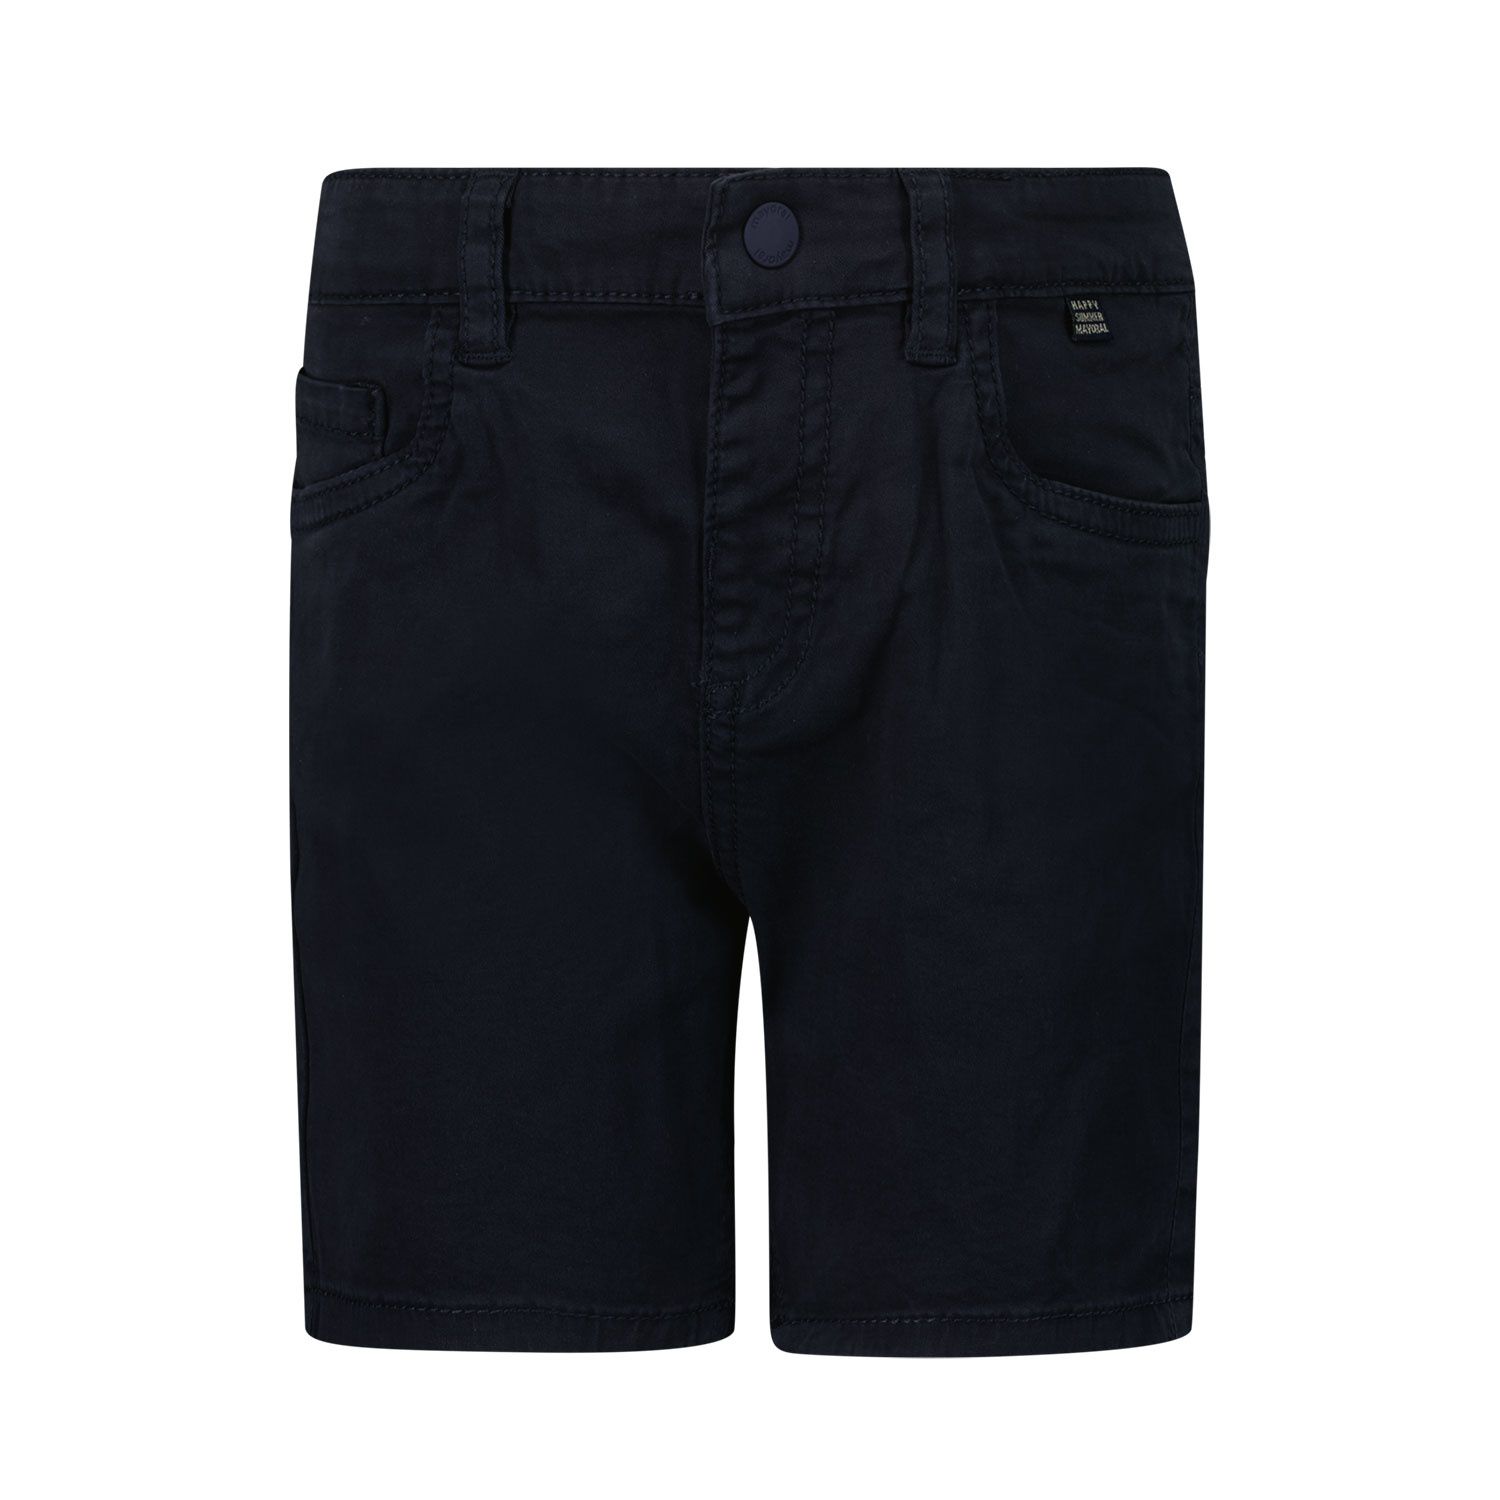 Picture of Mayoral 206 baby shorts navy